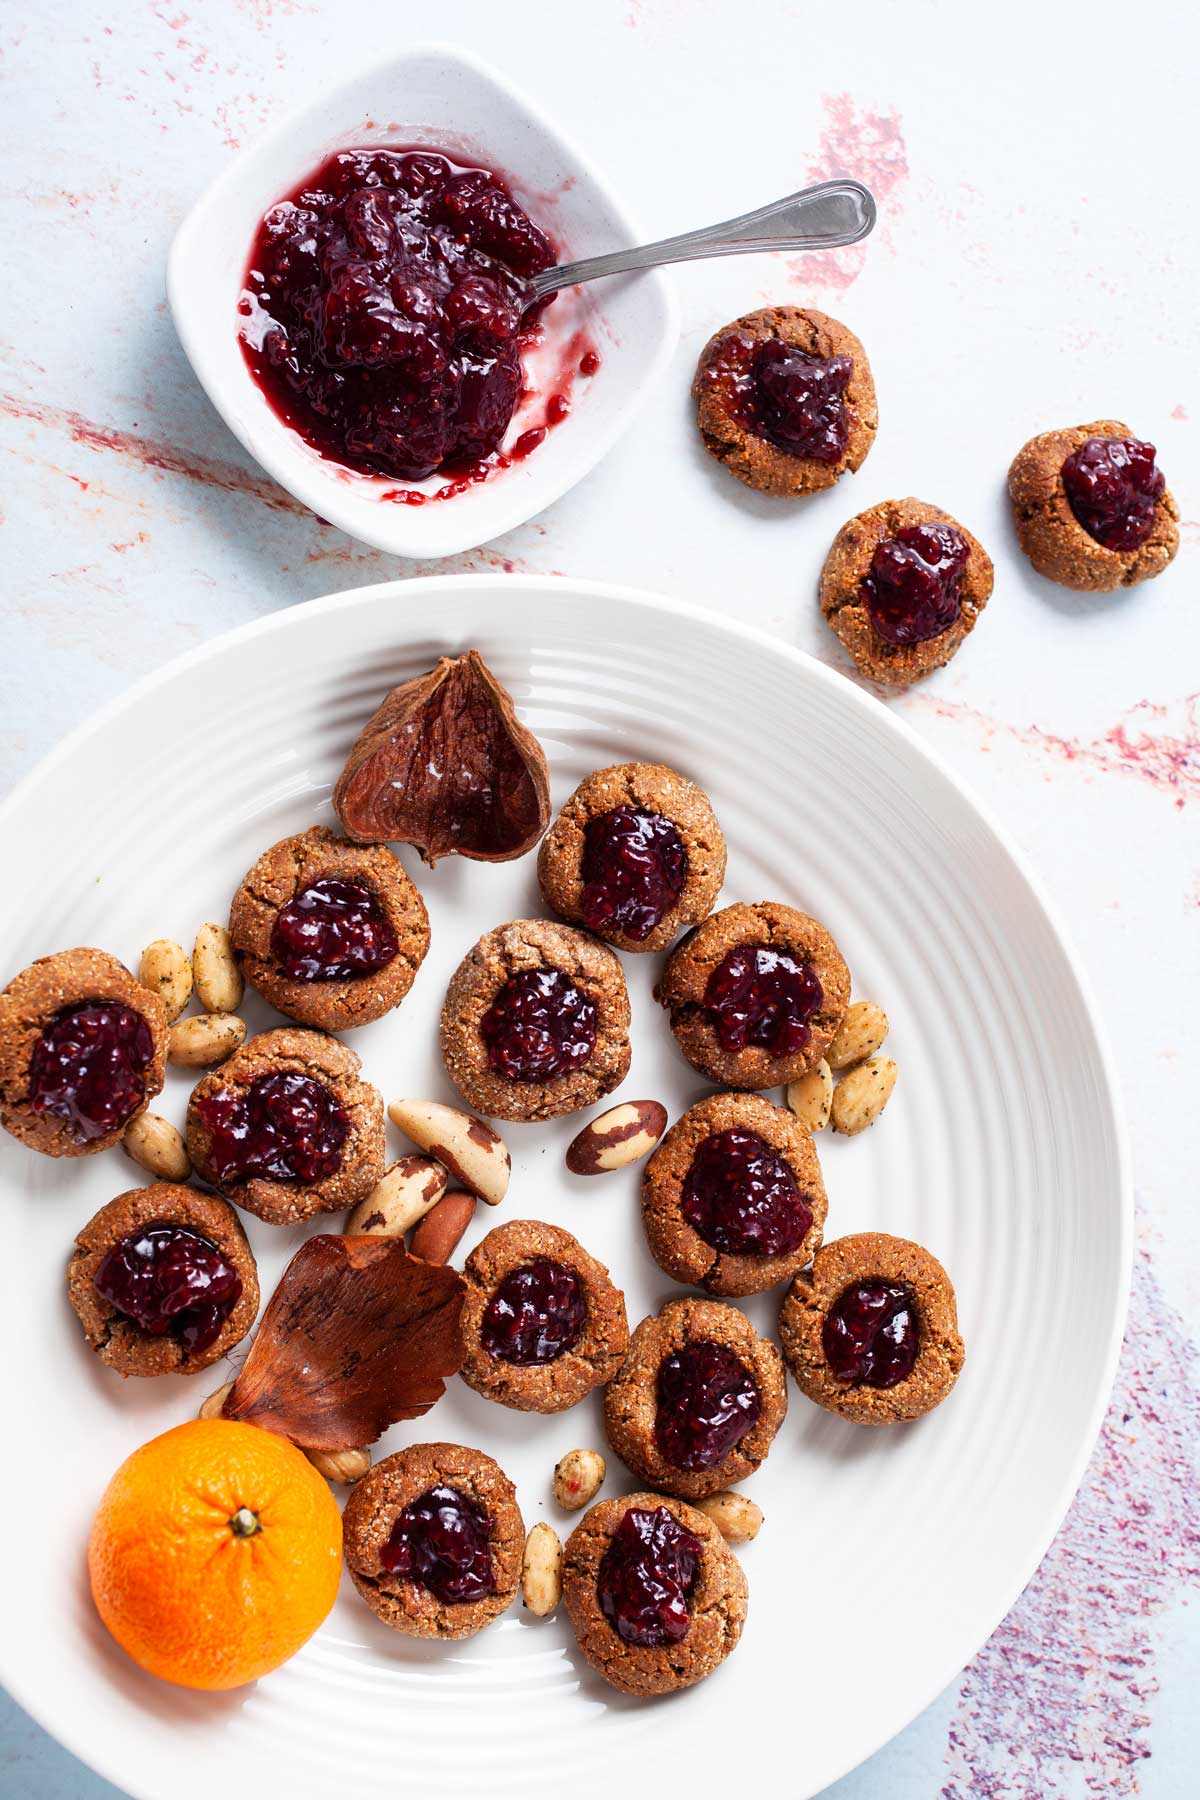 A plate filled with gluten-free almond flour cookies, topped with jam.